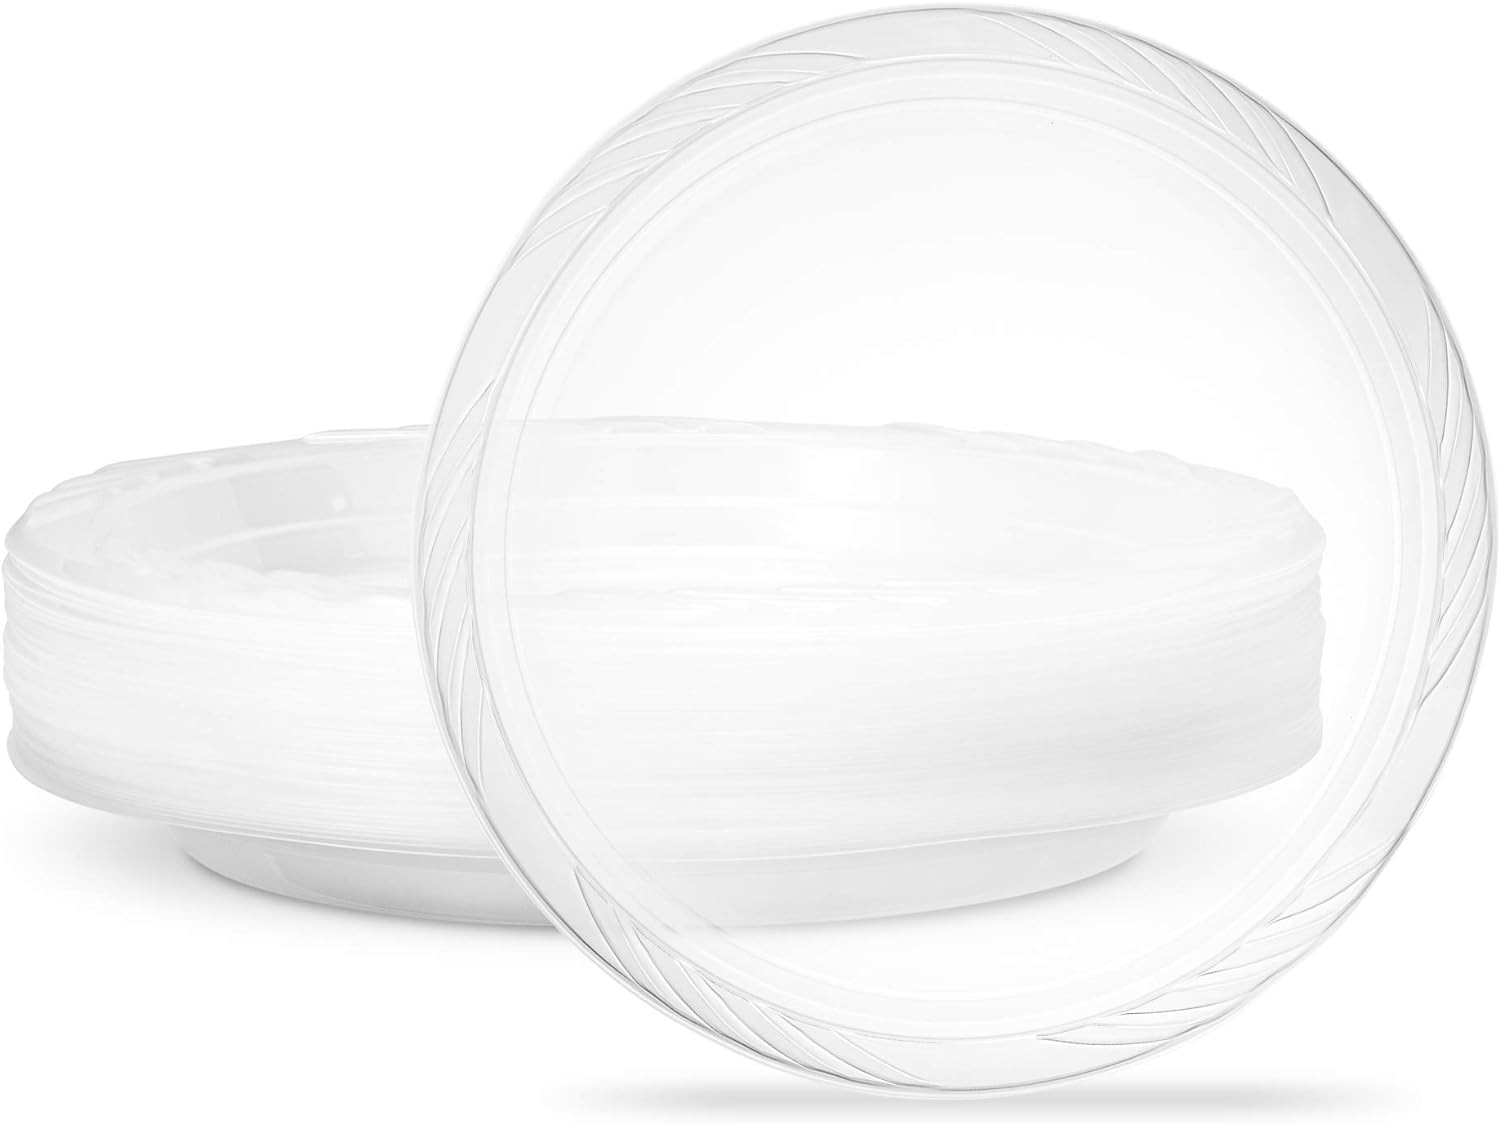 PLASTICPRO 10'' inch Premium Crystal Clear Disposable Plastic Dinnerware Party Plate Pack of 40